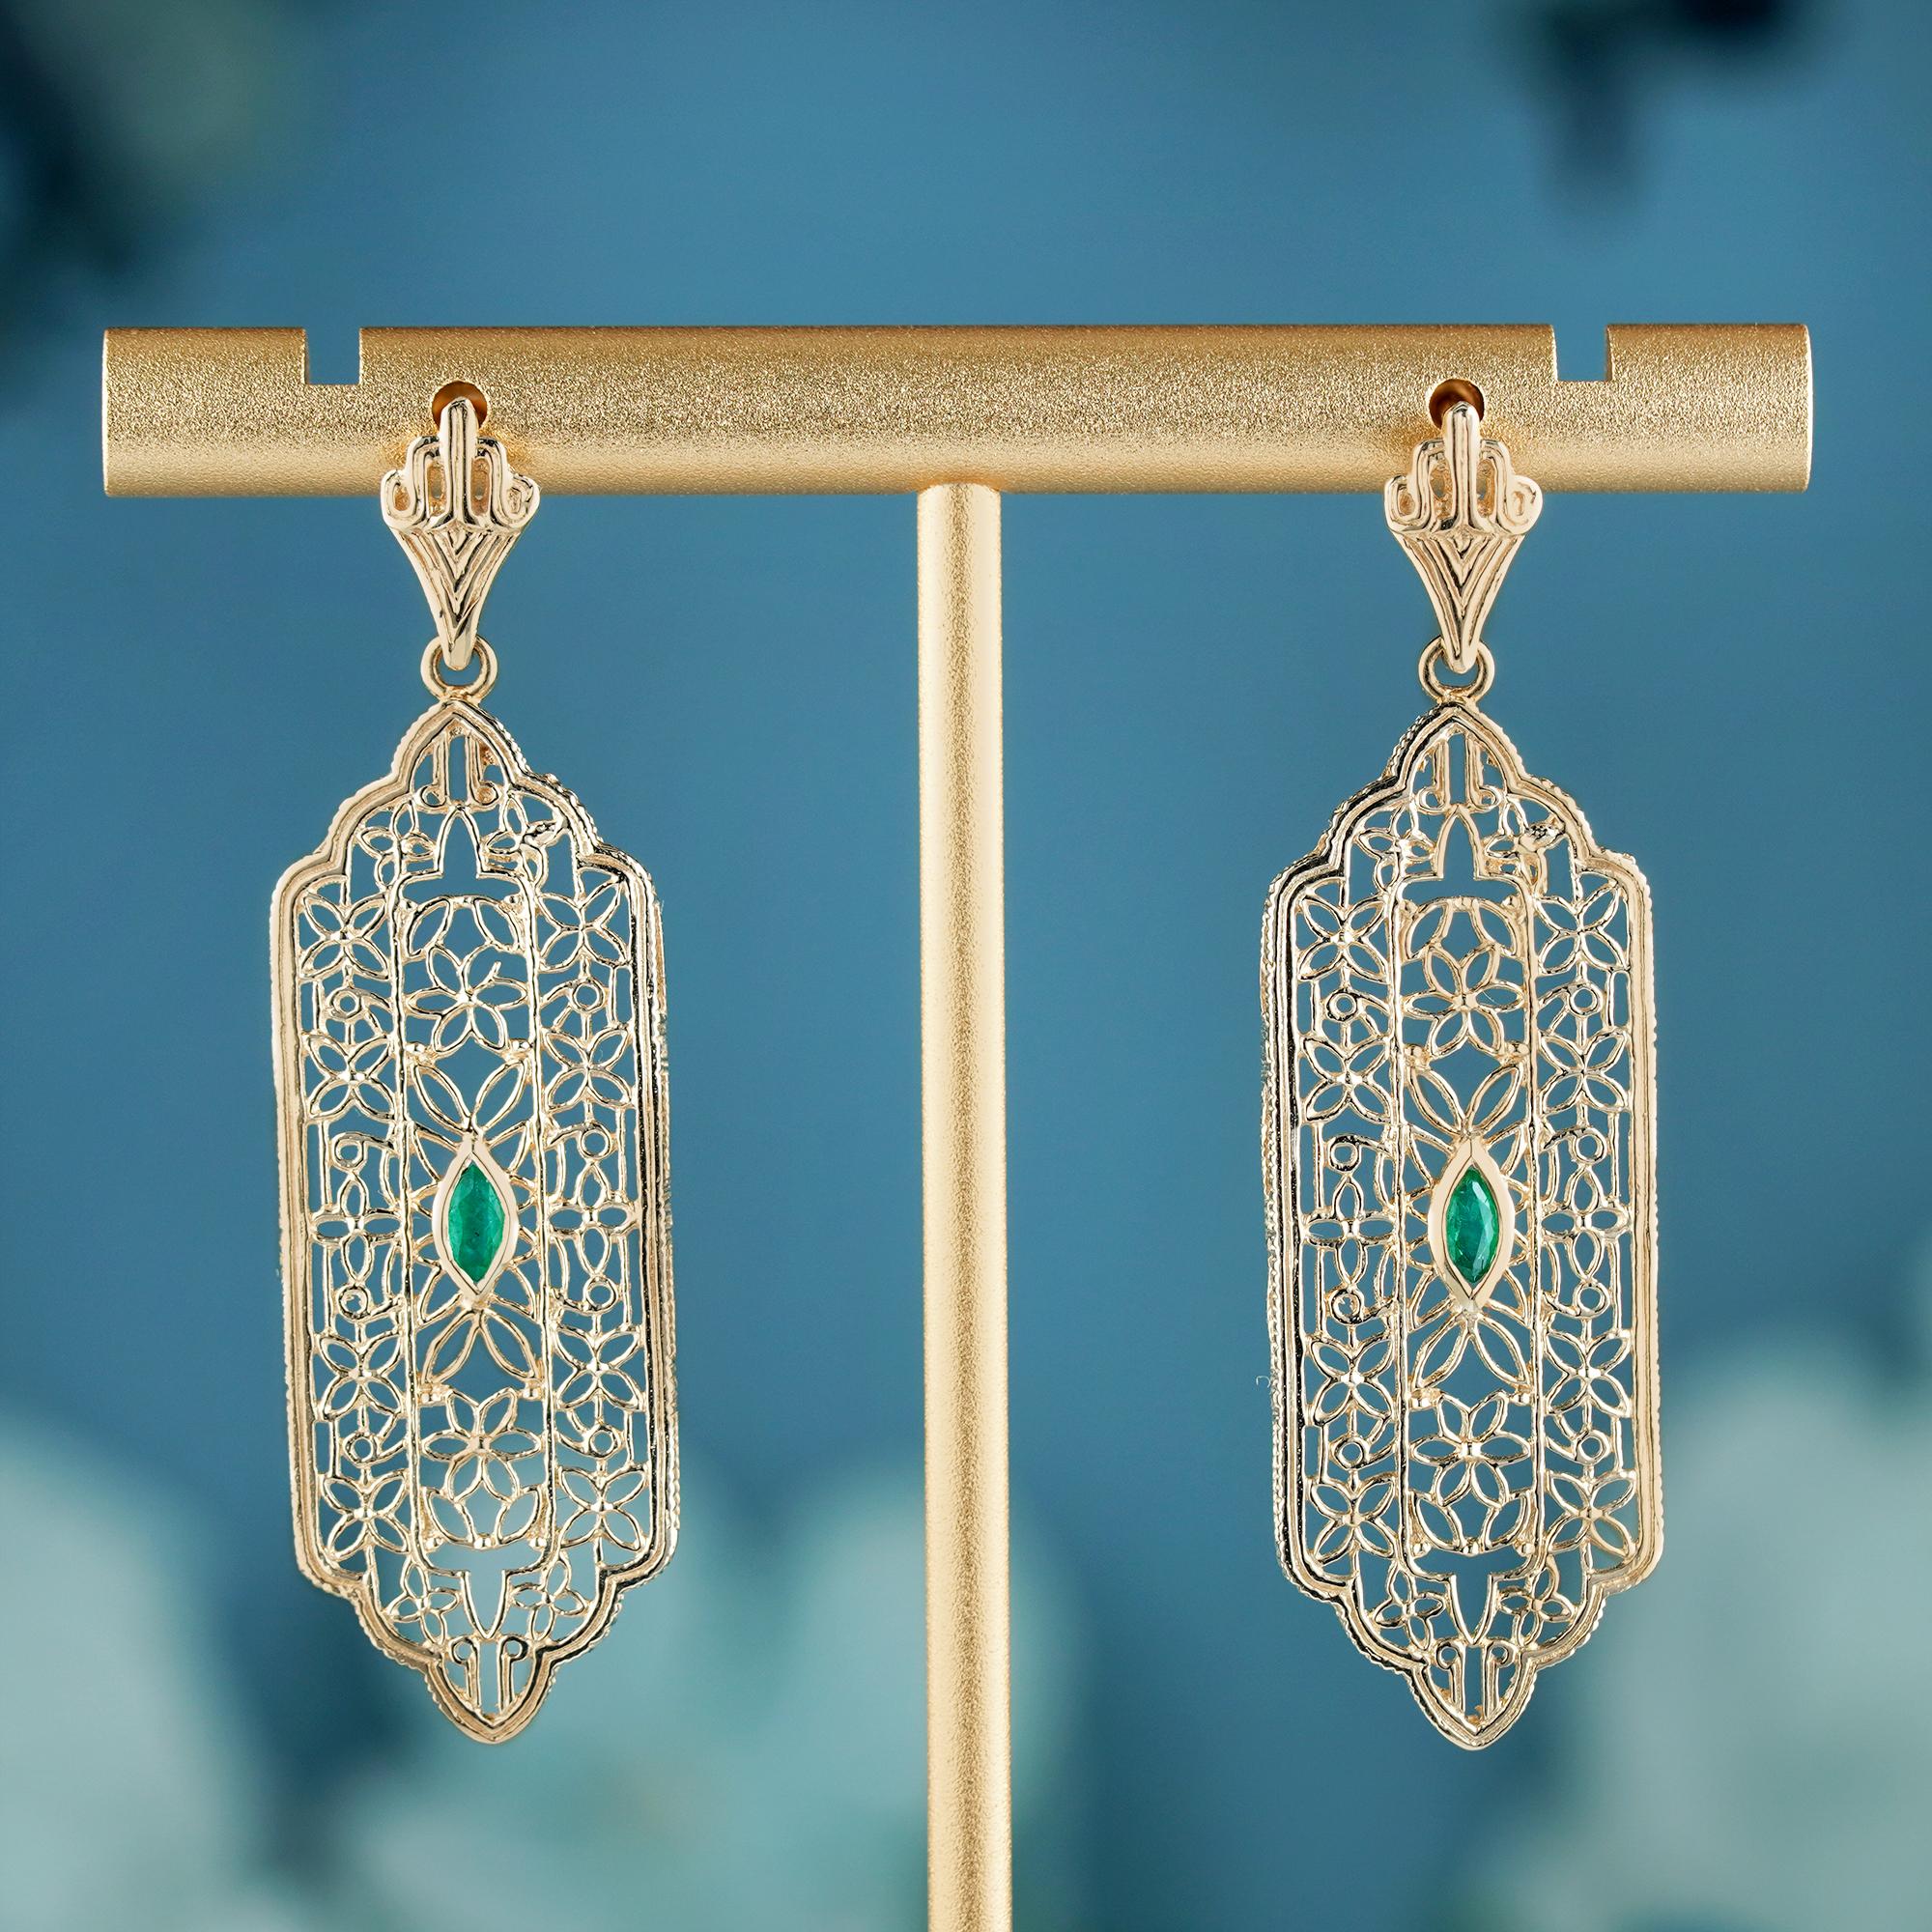 Add a delicate and unique aesthetic to your look with these filigree earrings by GEMMA FILIGREE. Our antique design gold filigree earrings equate to delicacy and light openwork, while maintains strength for everyday wear for a lifetime.

This